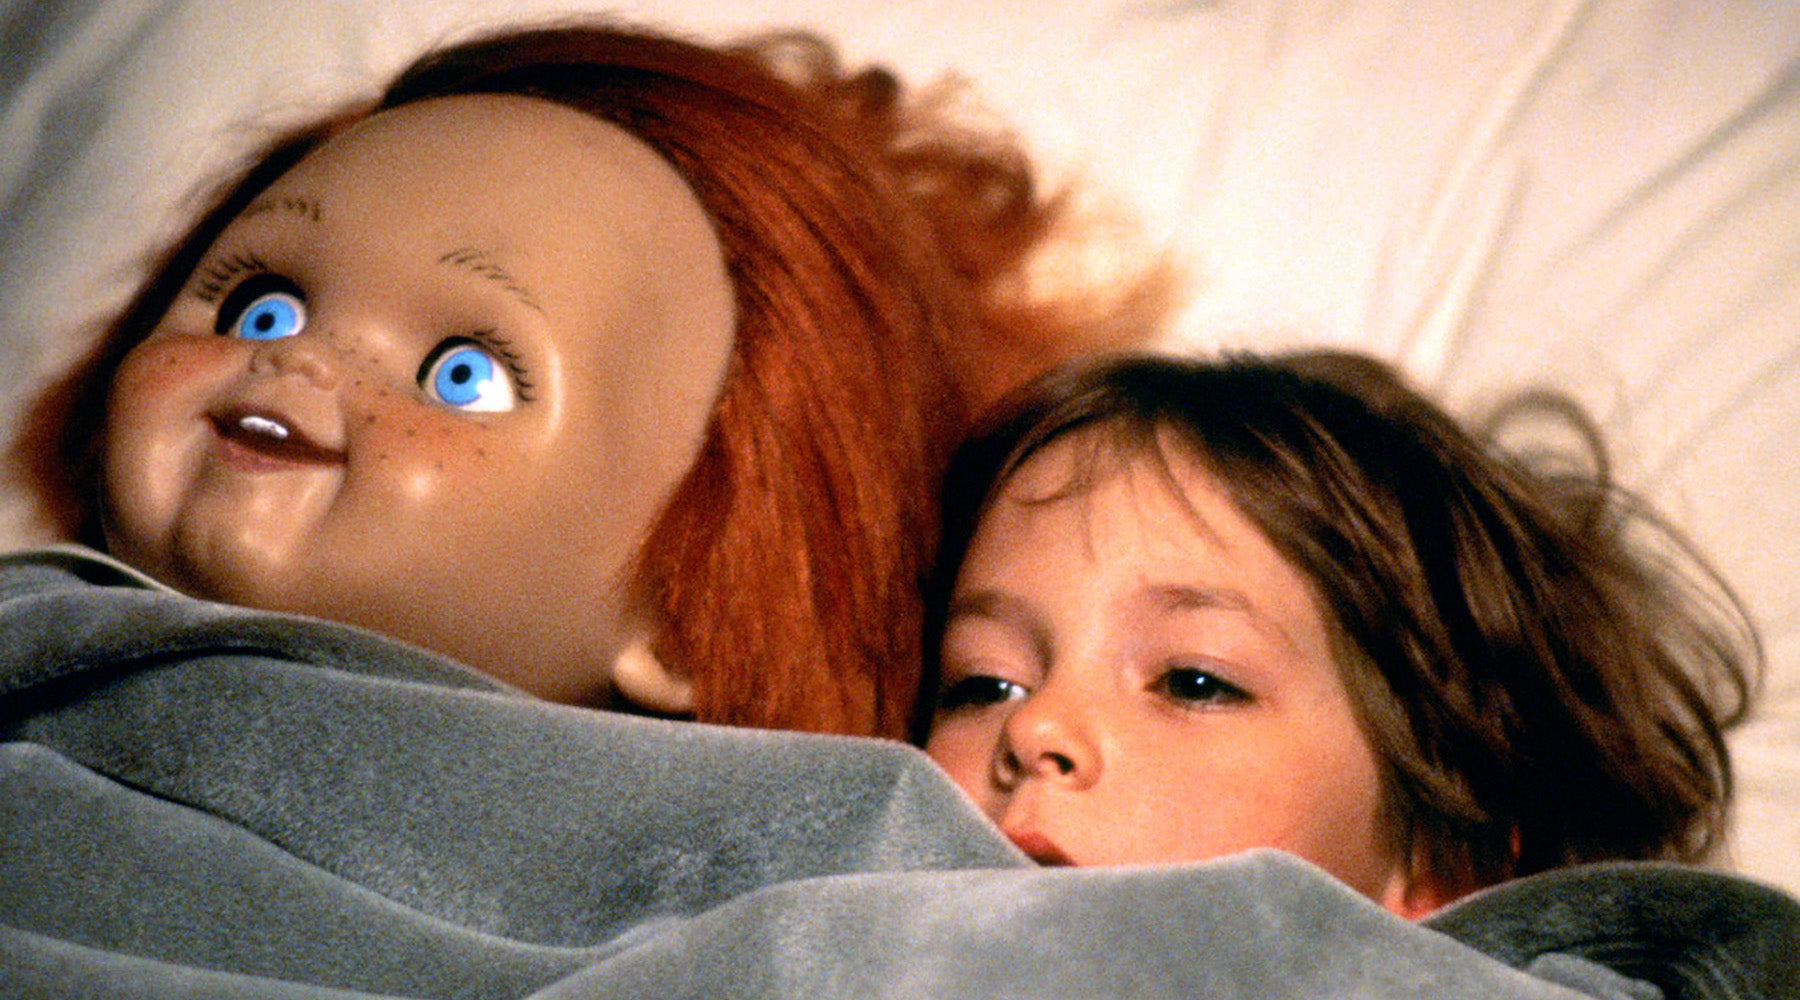 The Child's Play Franchise: Why We Love It